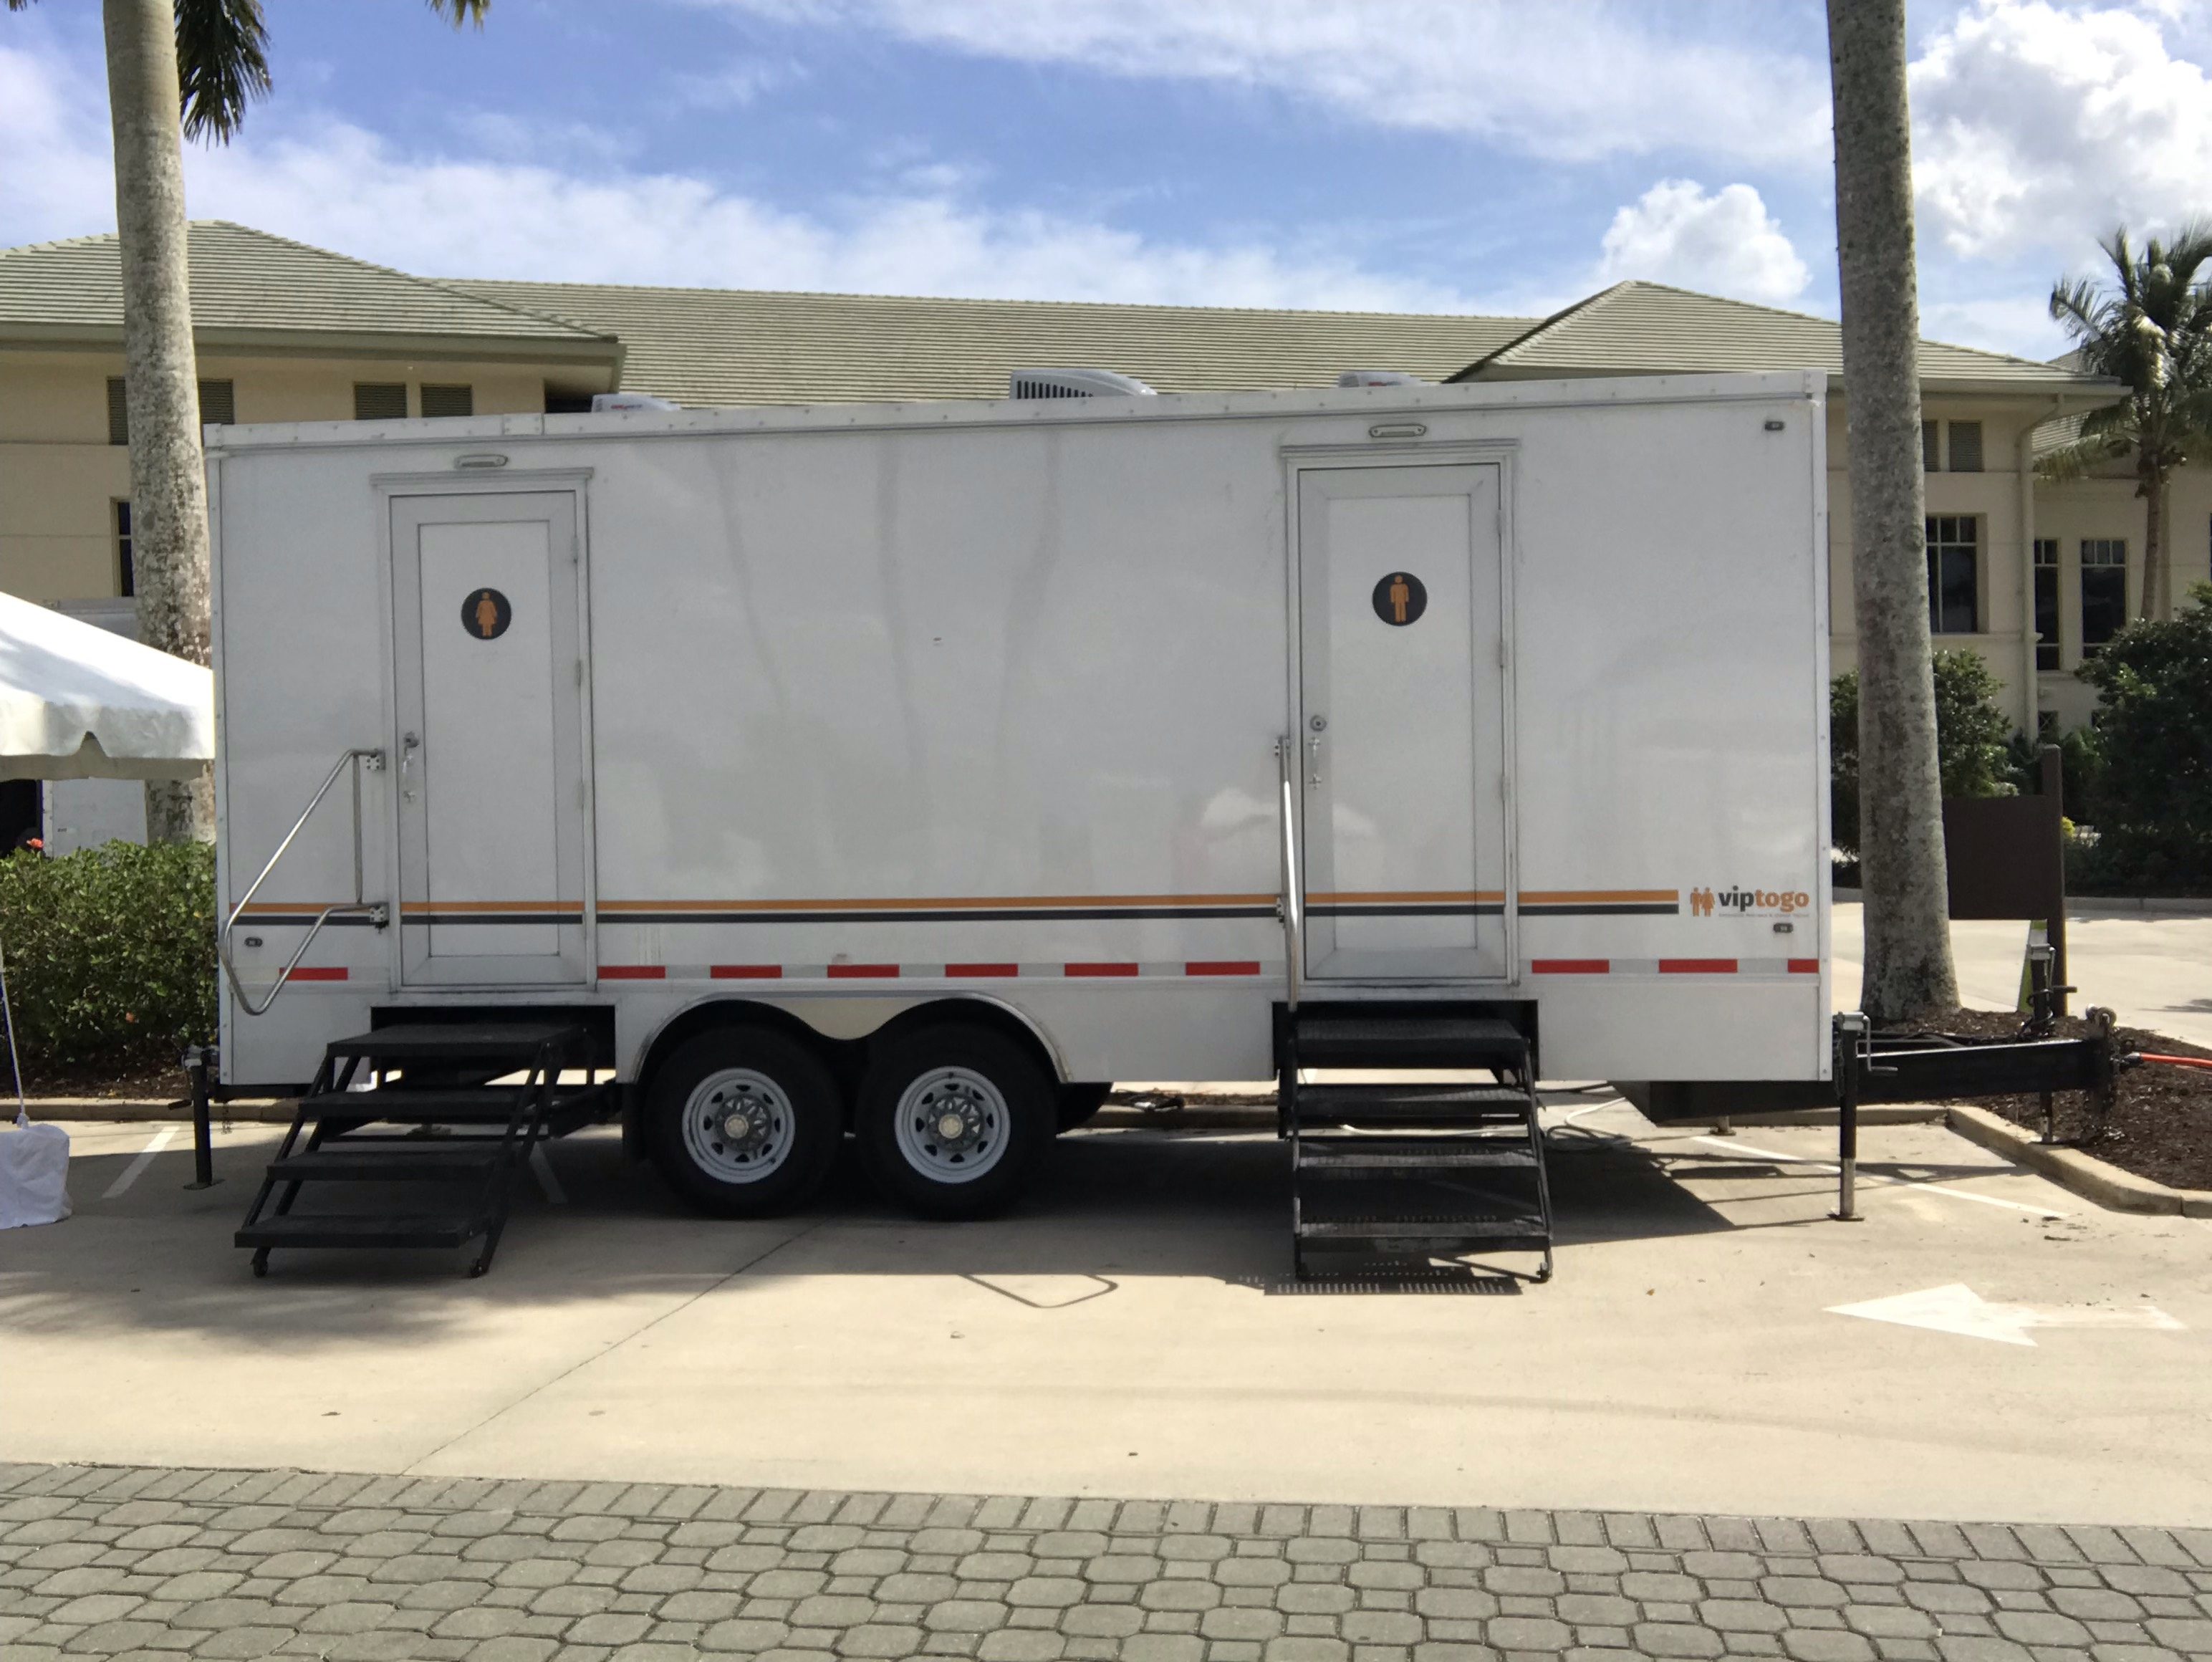 Eight Station Vegas Restroom Trailer, at the Boca West Country Club, in Boca Raton FL 